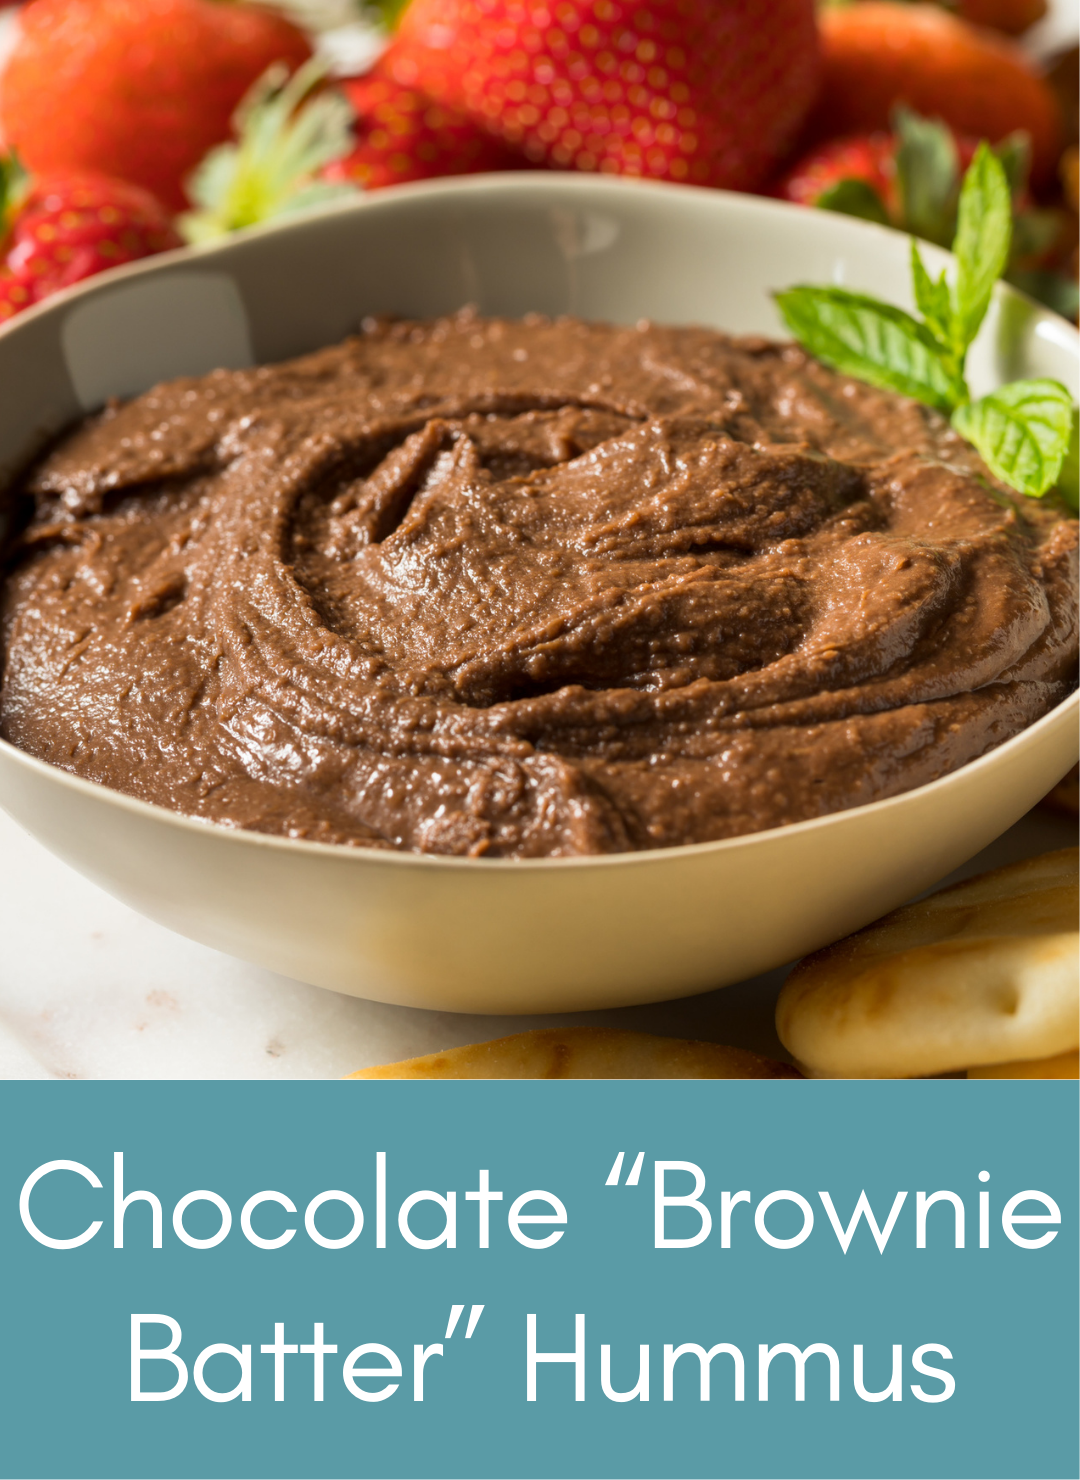 Chocolate brownie batter hummus vegan Picture with link to recipe